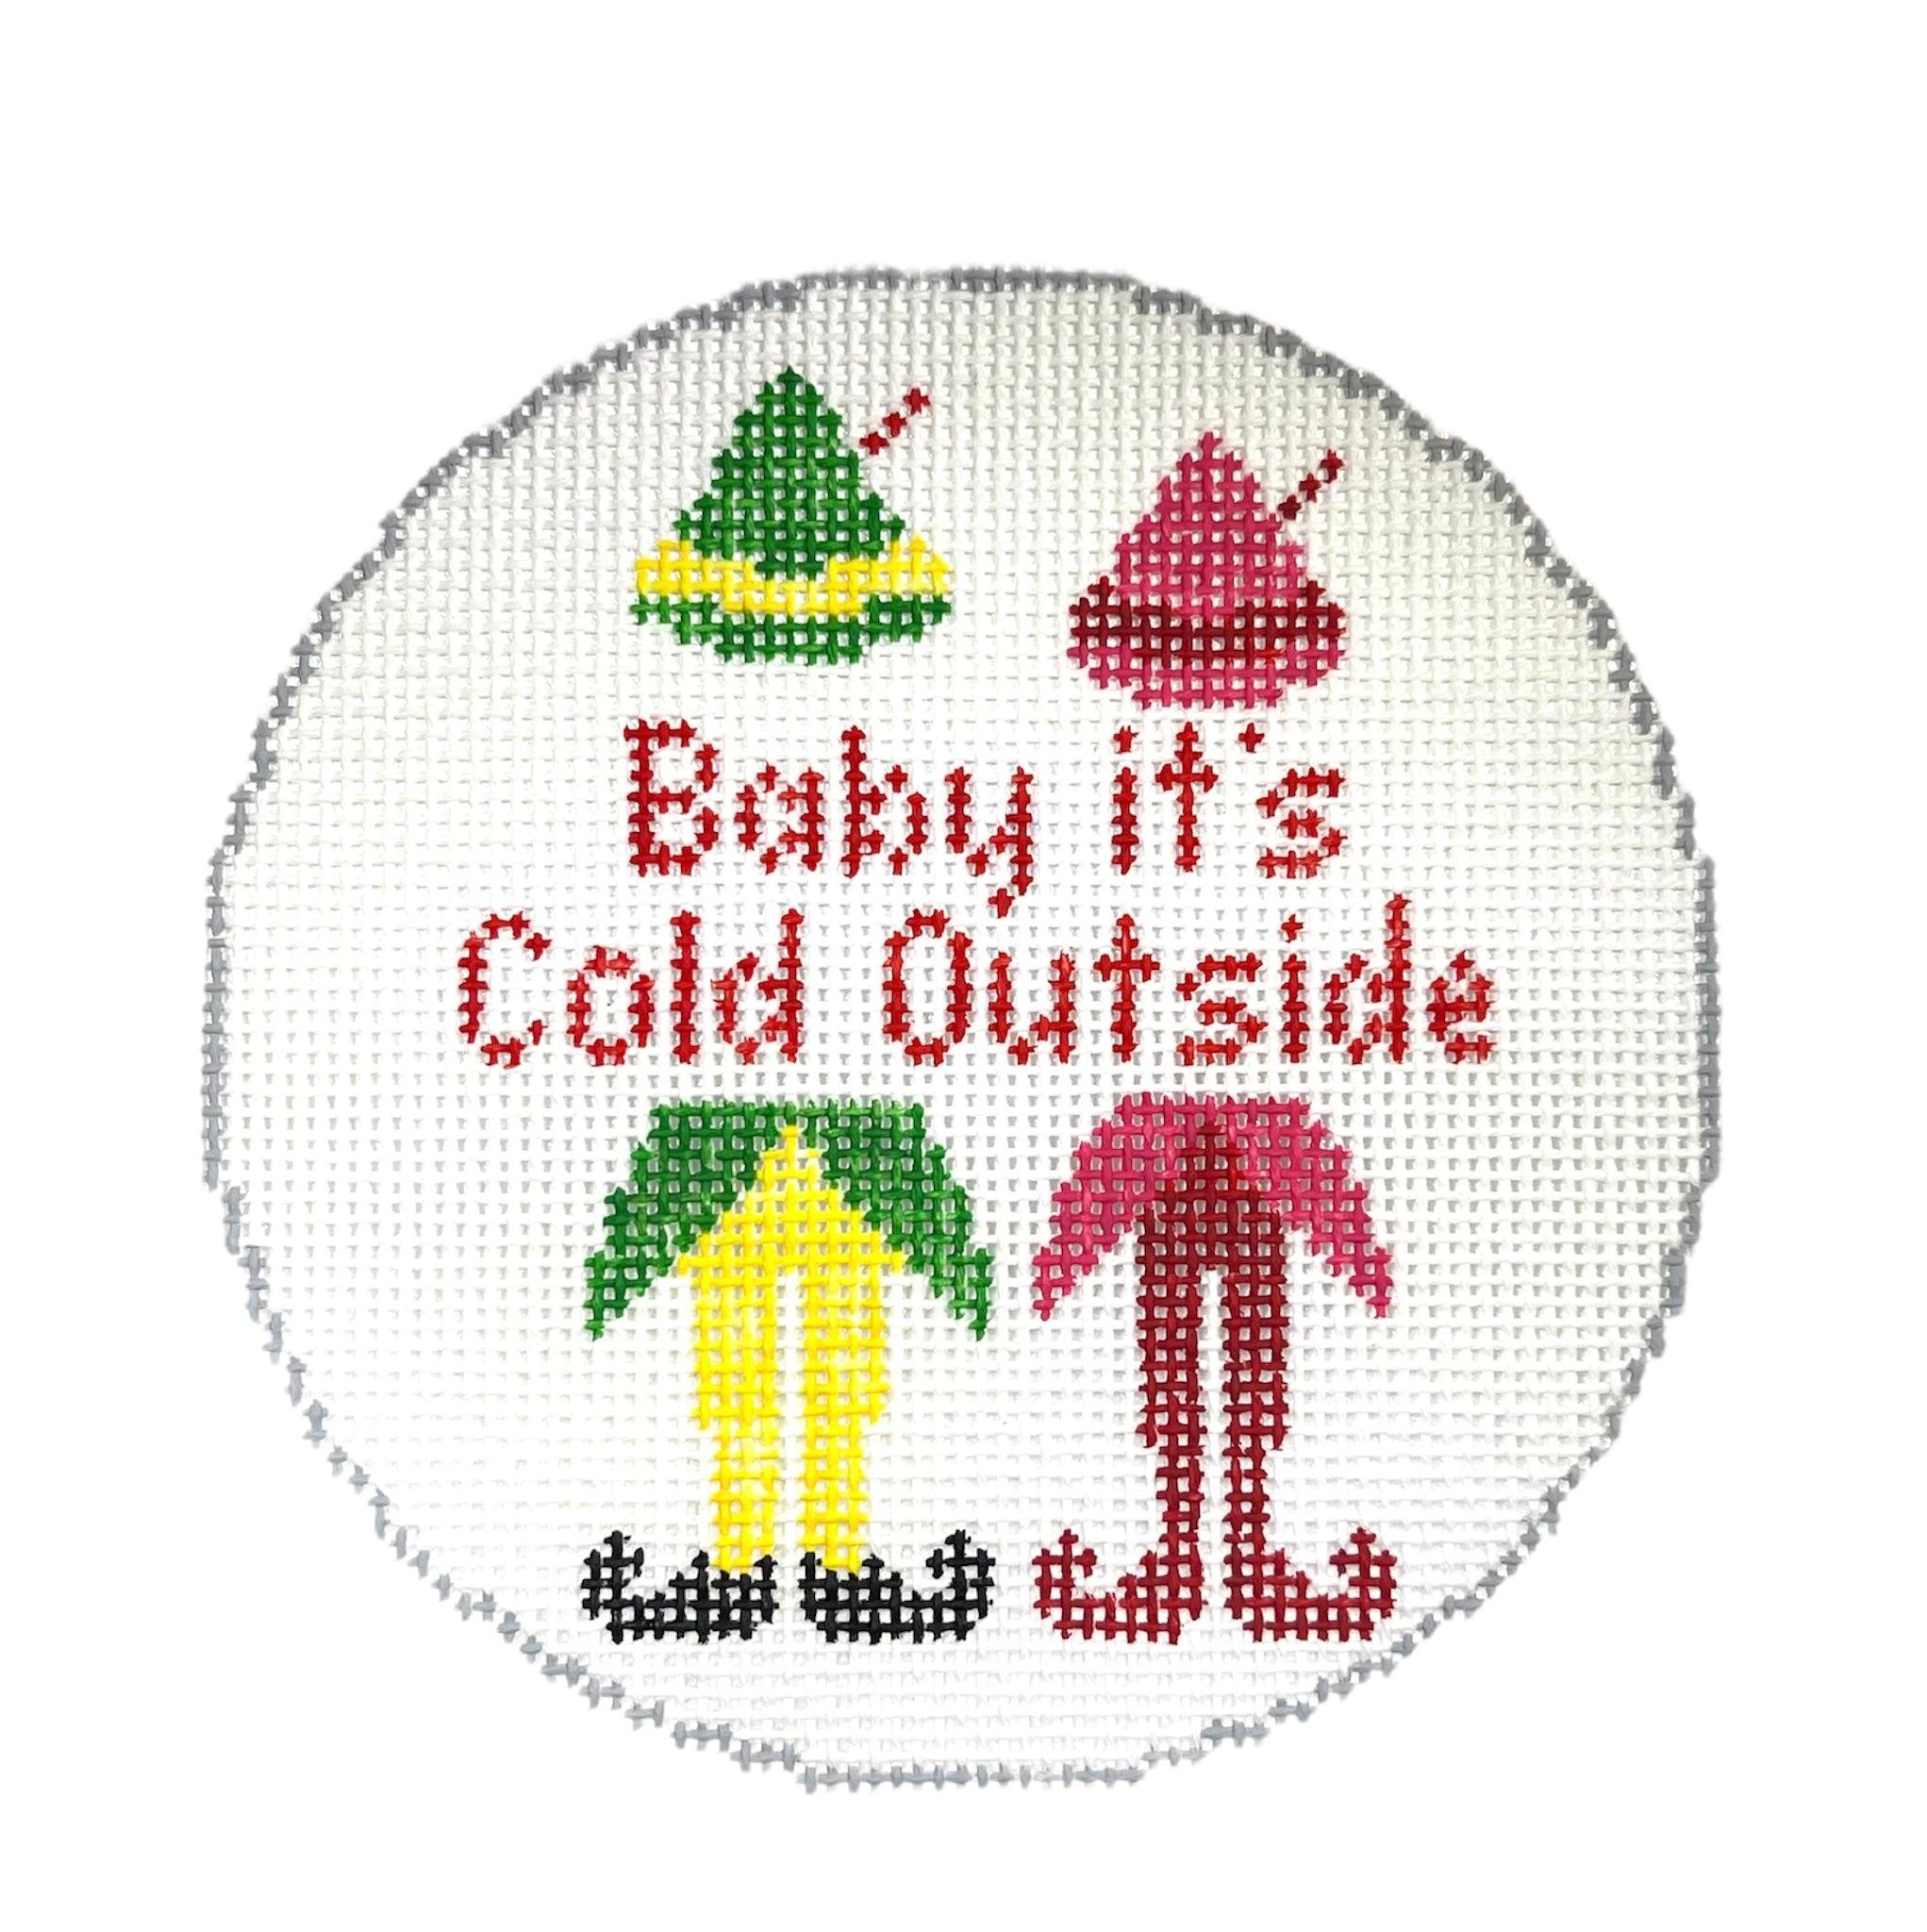 Elf Needlepoint Canvas Baby it's Cold Outside - Needlepoint by Laura